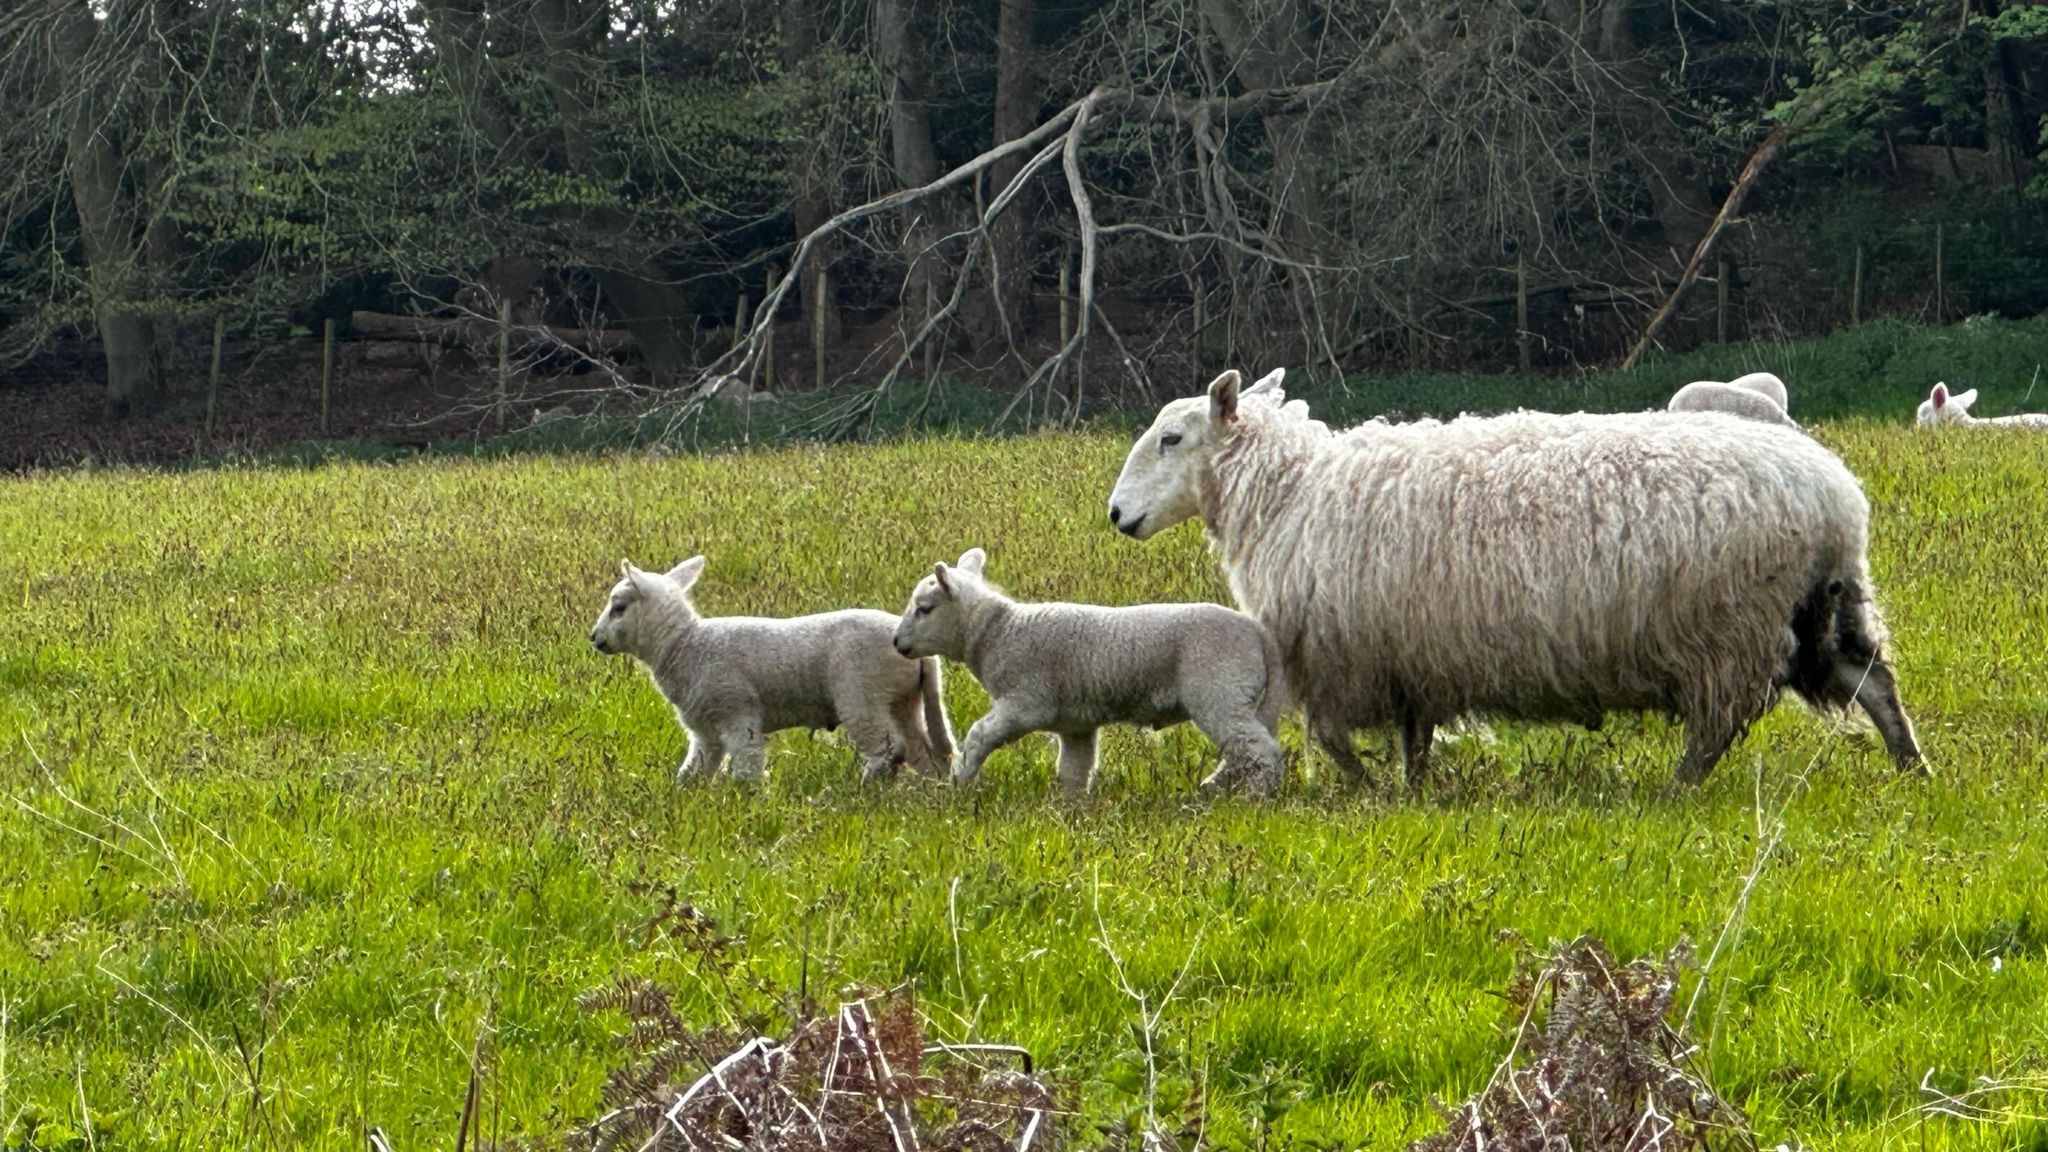  A family of sheep